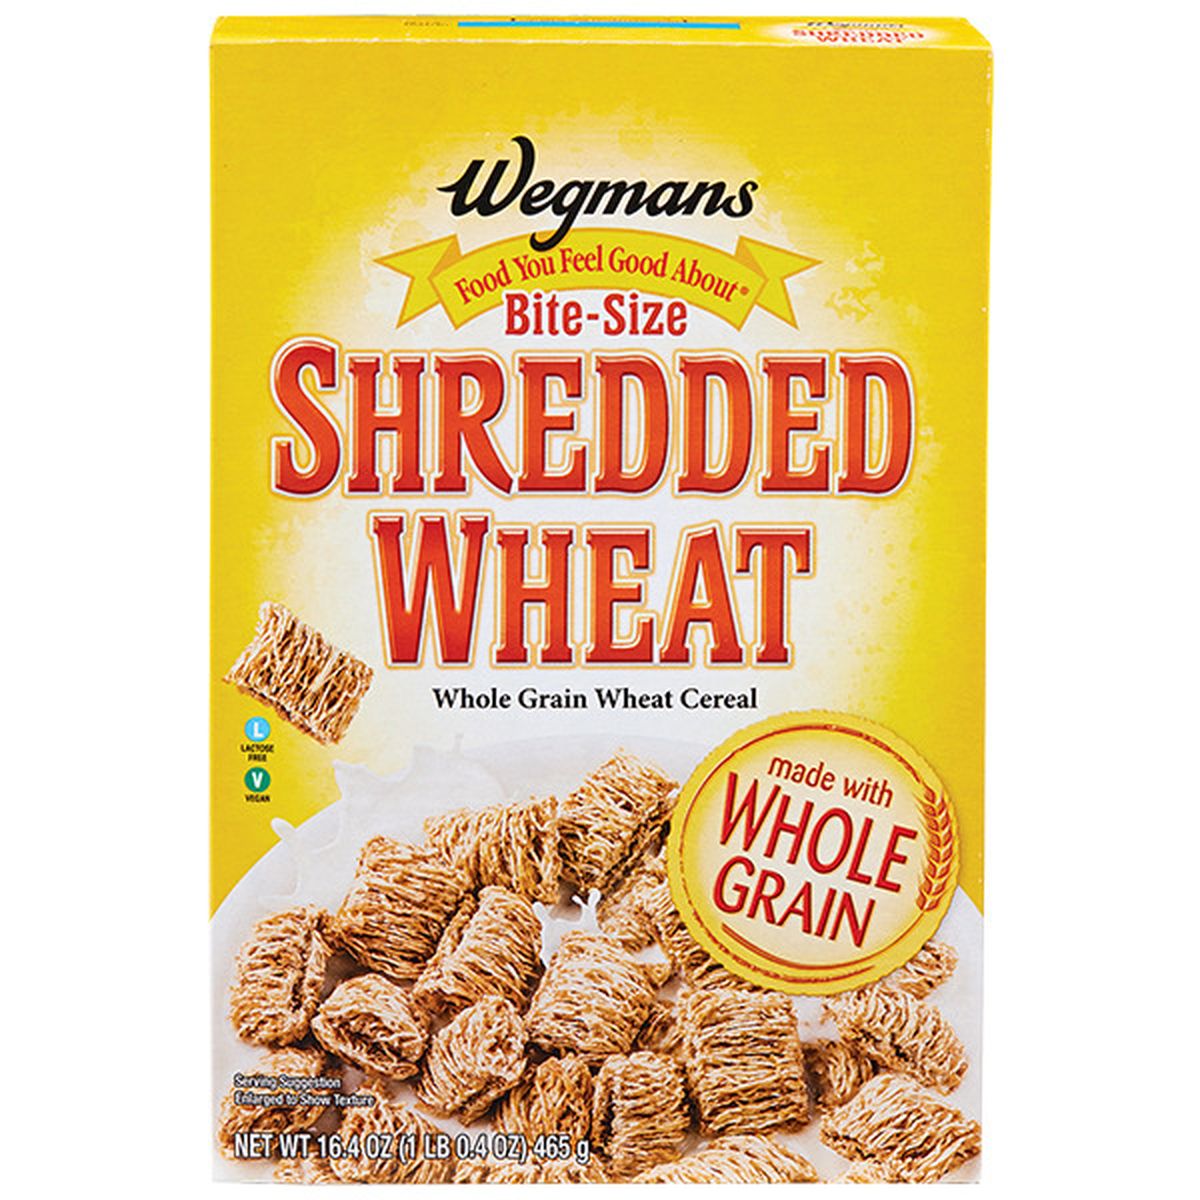 Calories in Wegmans Bite-Size Shredded Wheat Cereal